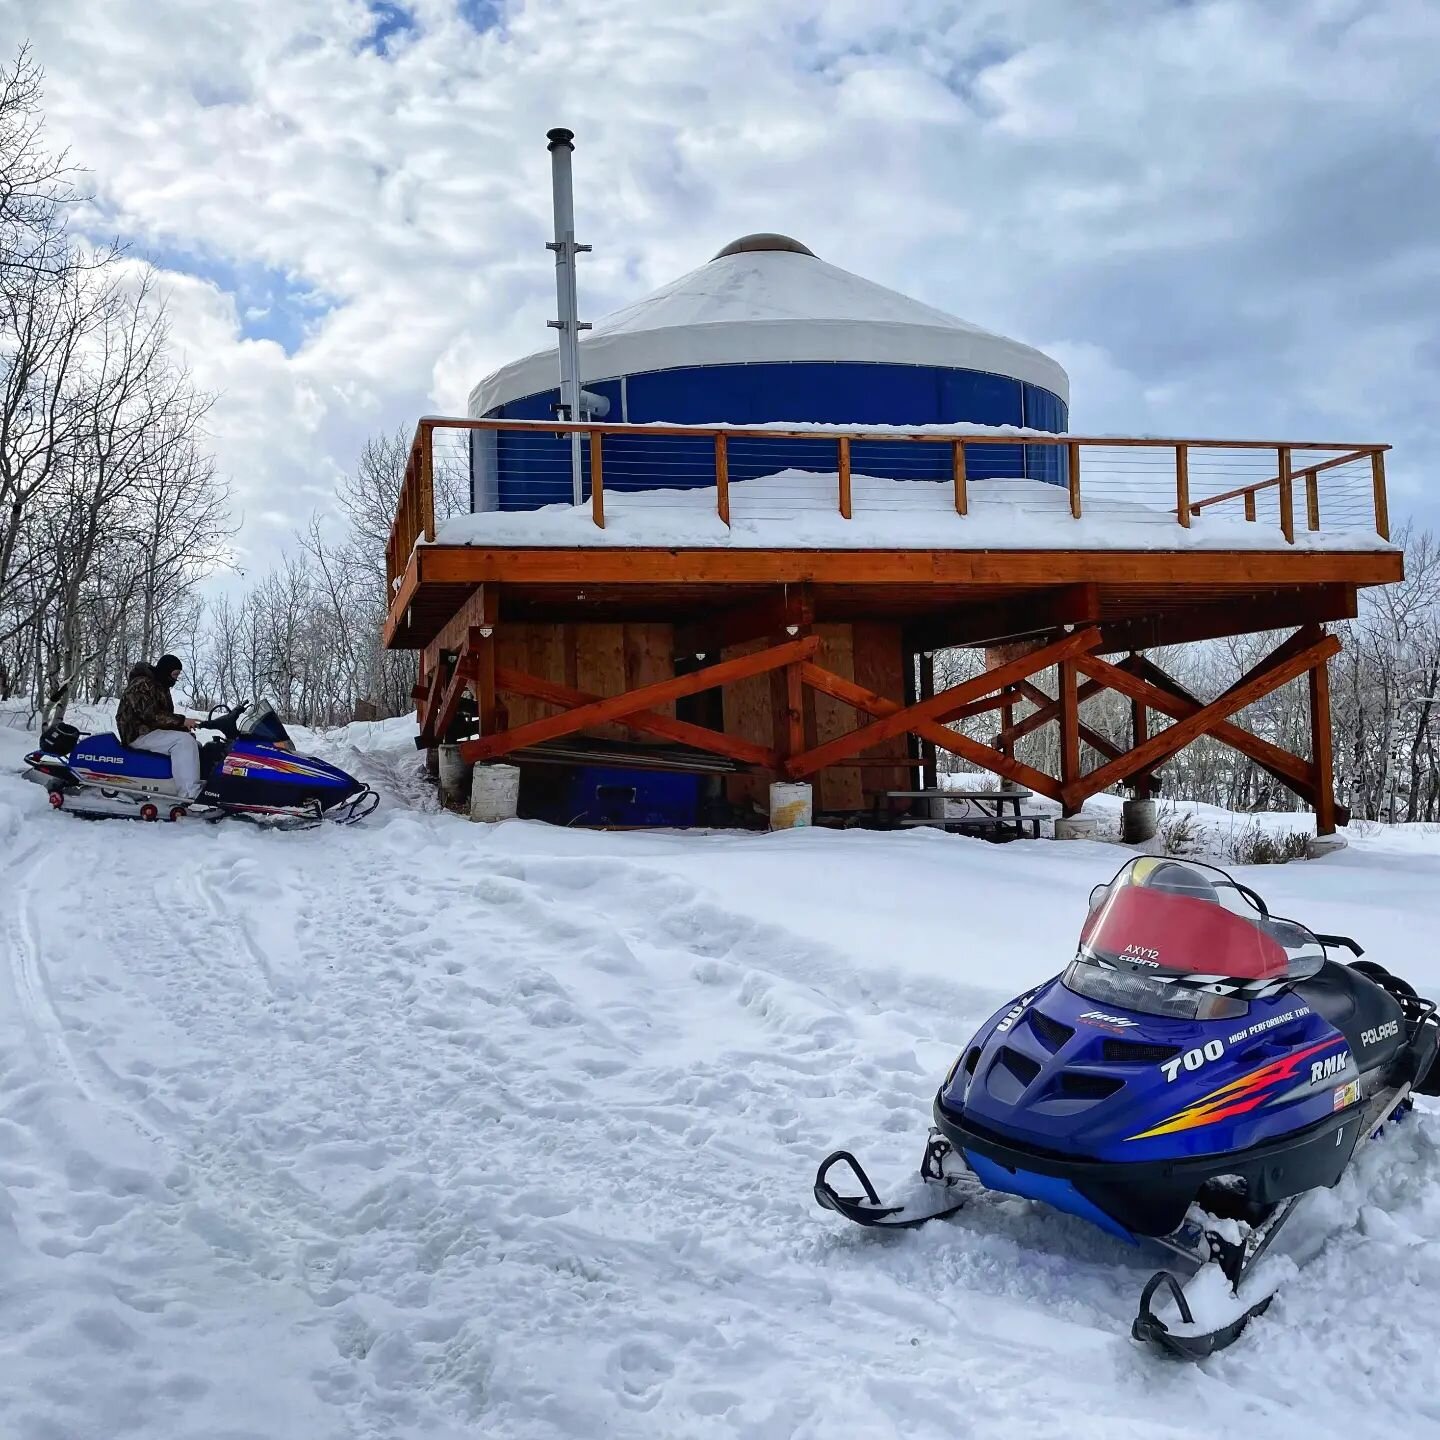 Winter came a bit earlier this year, and we're loving it! ❄️
Winter dates are filling quick, so act soon if you want to enjoy some winter yurting!

#montecristoyurt #winteryurting #hurtinforsomeyurtin #winterwonderland #snowmobile #utahmoms #winterph